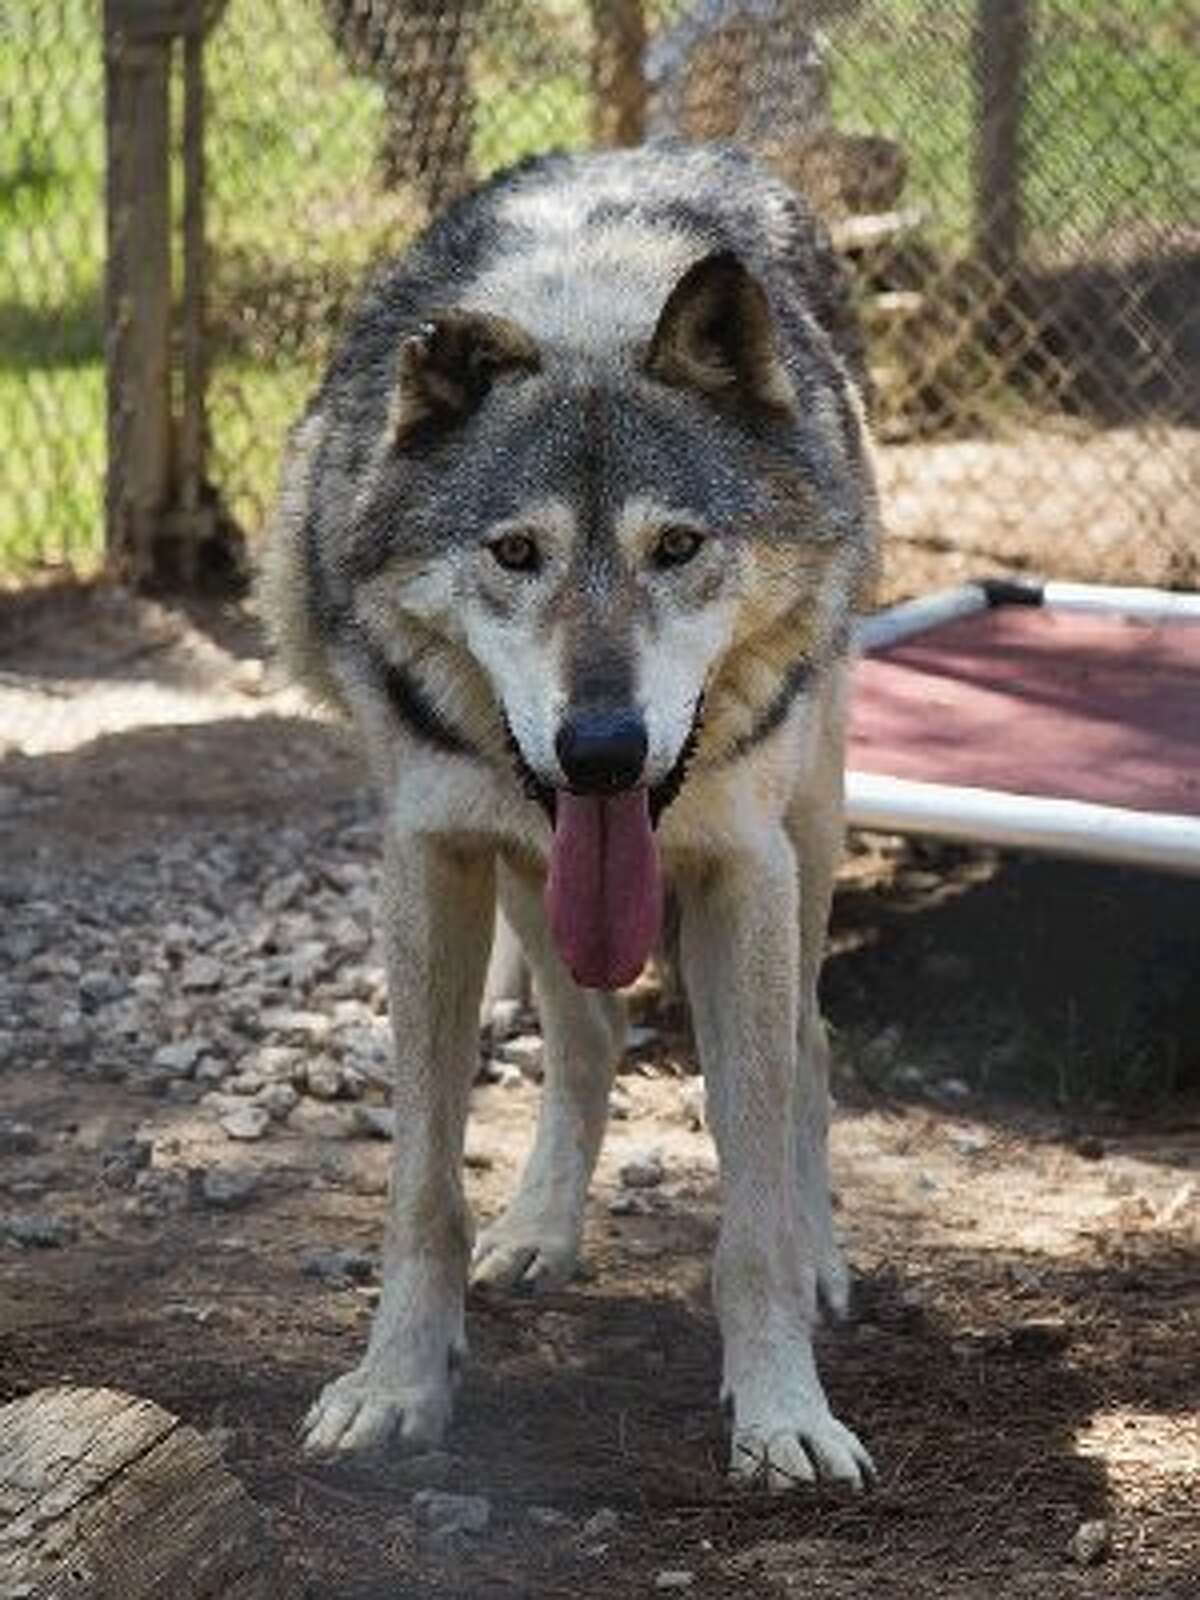 Originally from Alaska, Big Boy is the newest resident at the St. Francis Wolf Sanctuary in Montgomery.